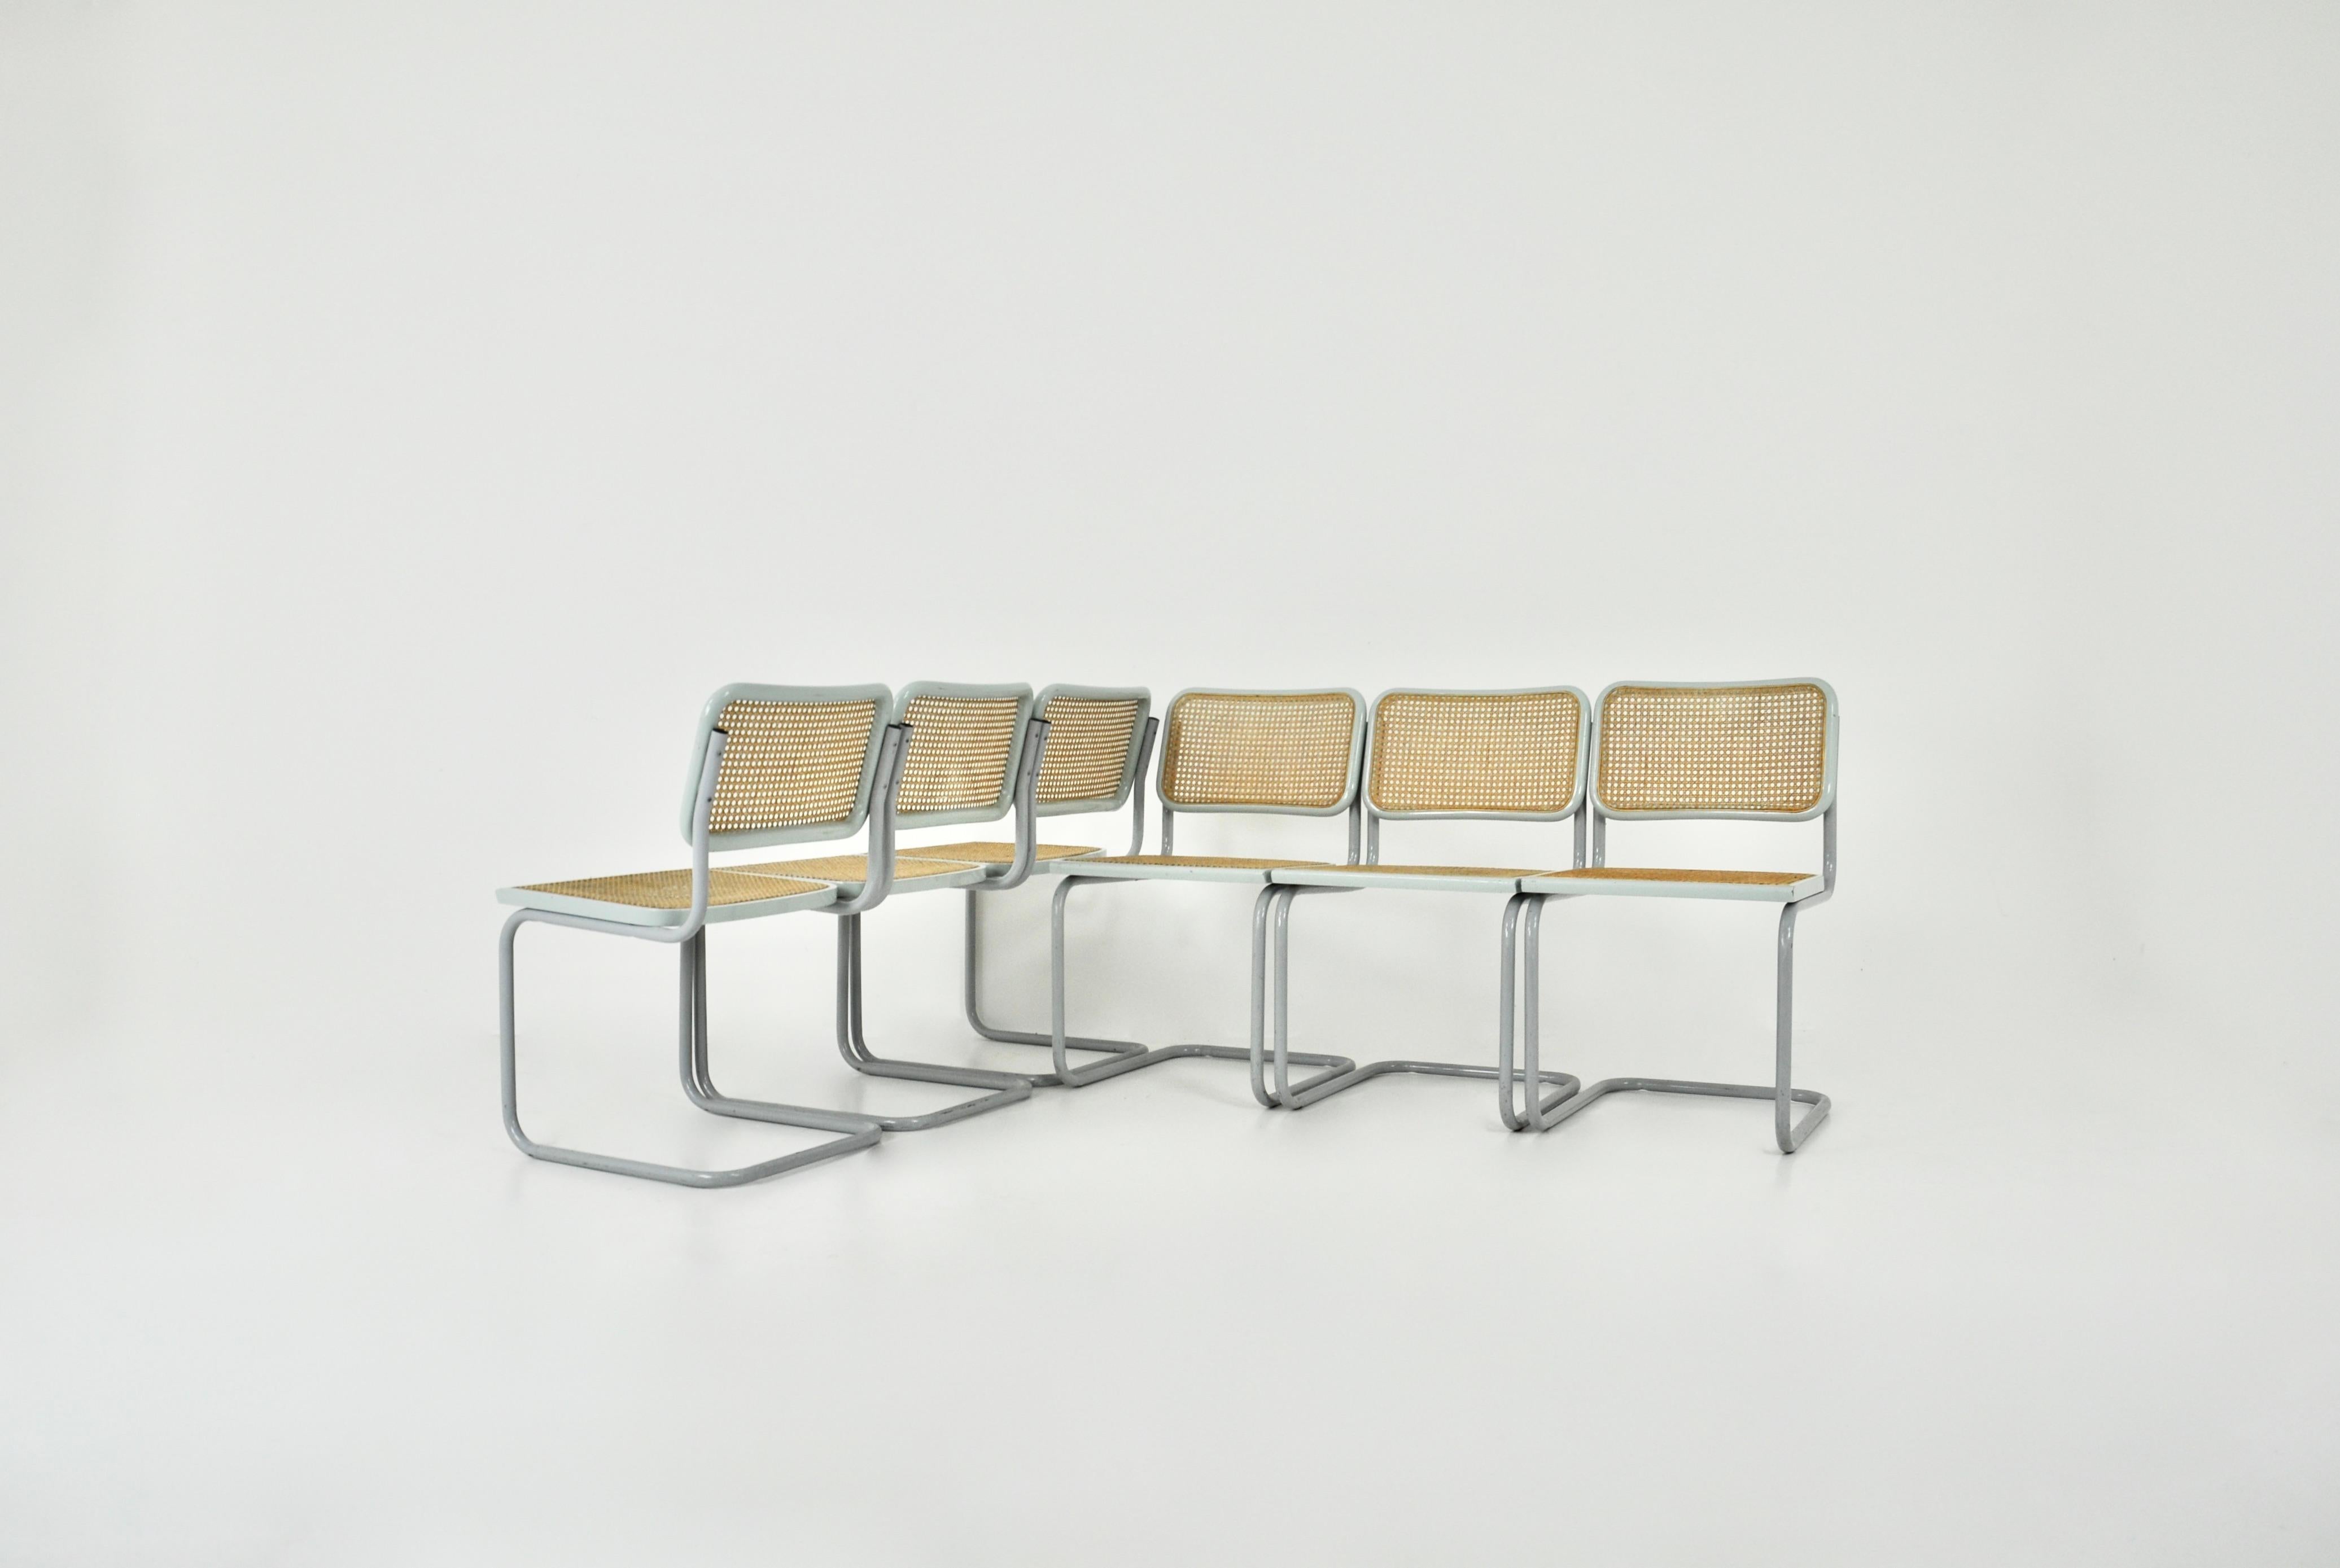 Set of 6 all-grey chairs in metal, wood and rattan. Dimensions: seat height: 46 cm. Wear due to time and age of the chairs.



